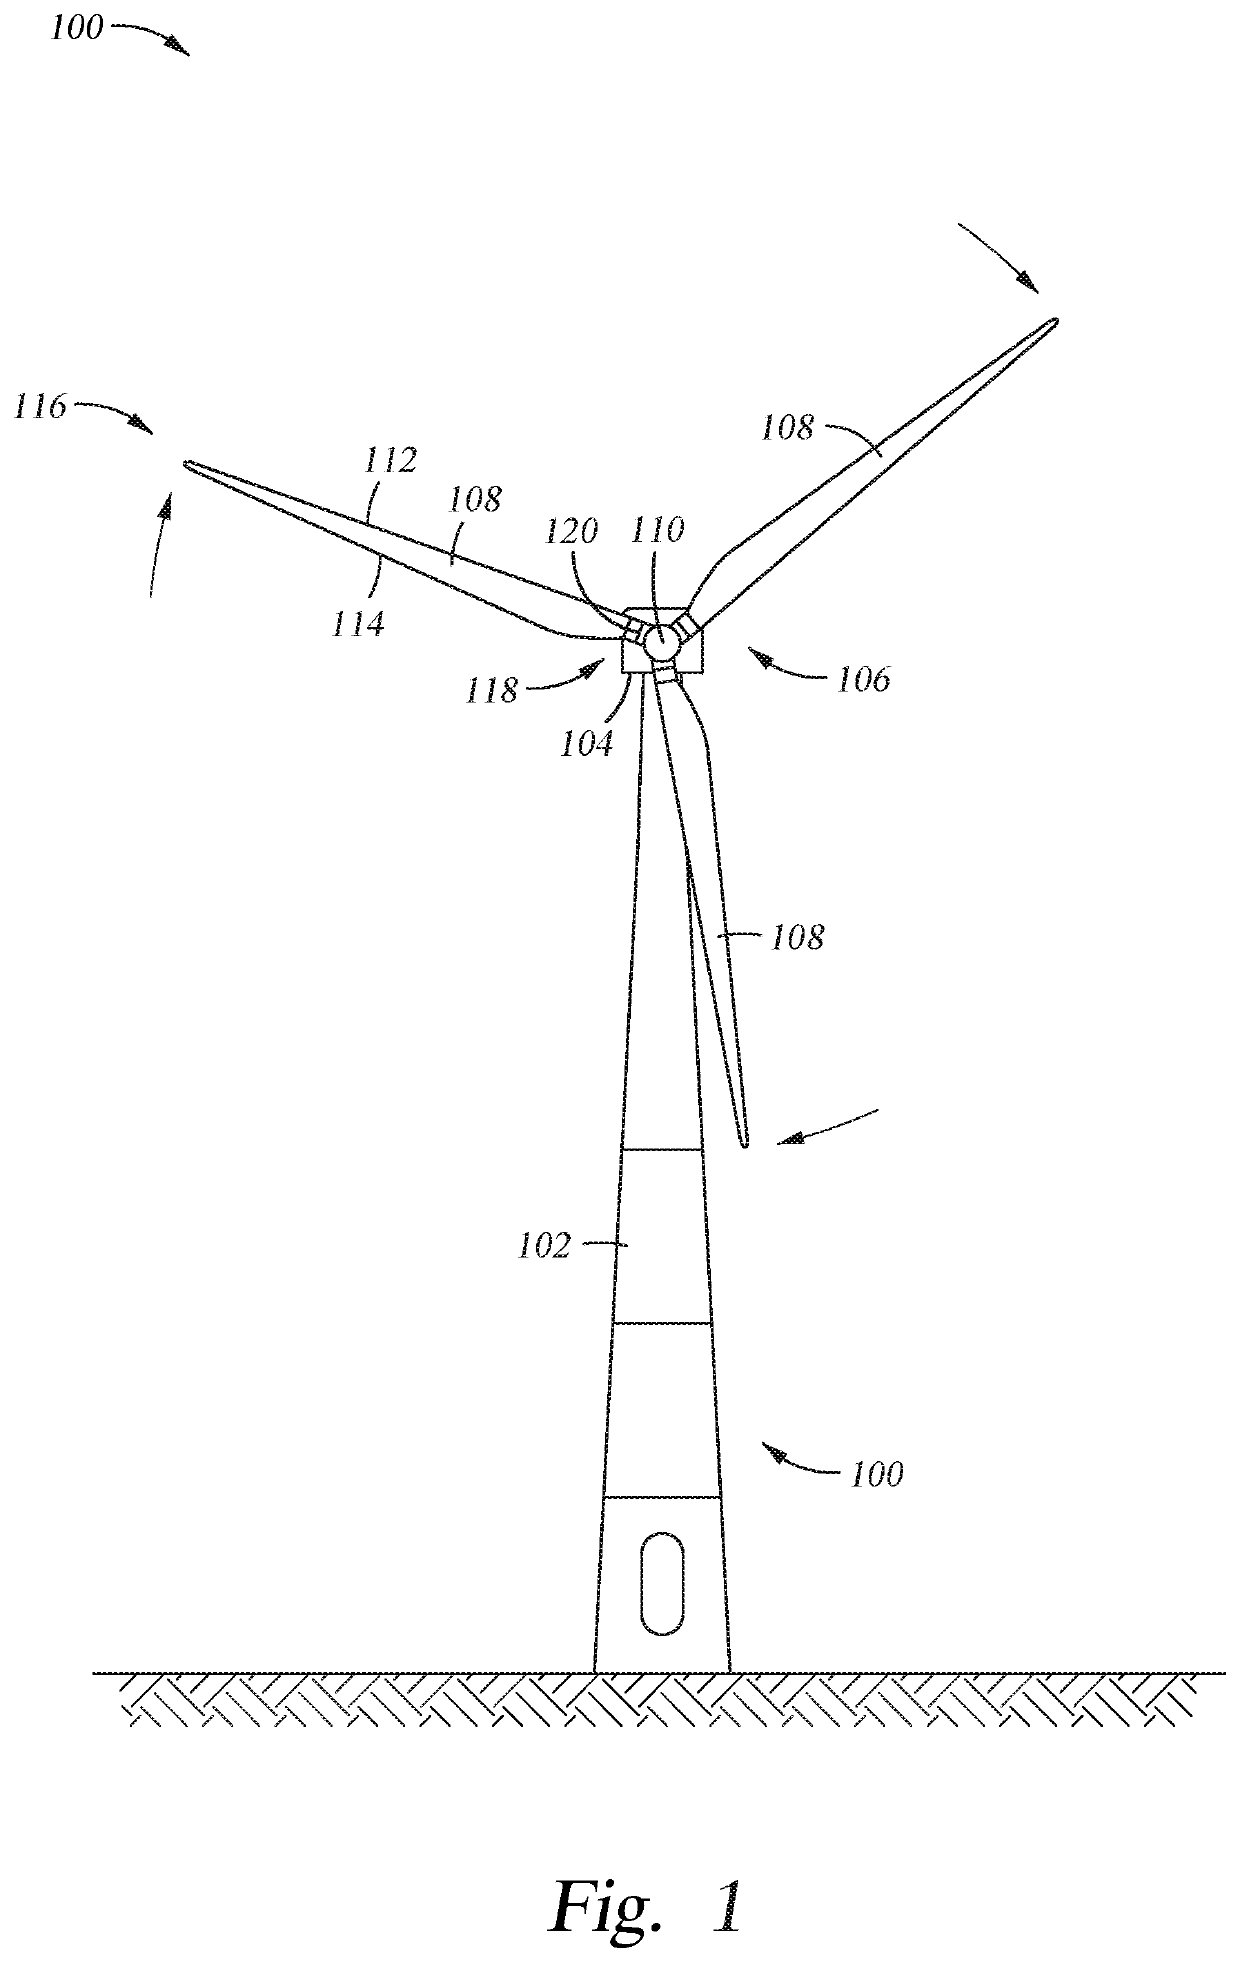 Tower damping in wind turbine power production